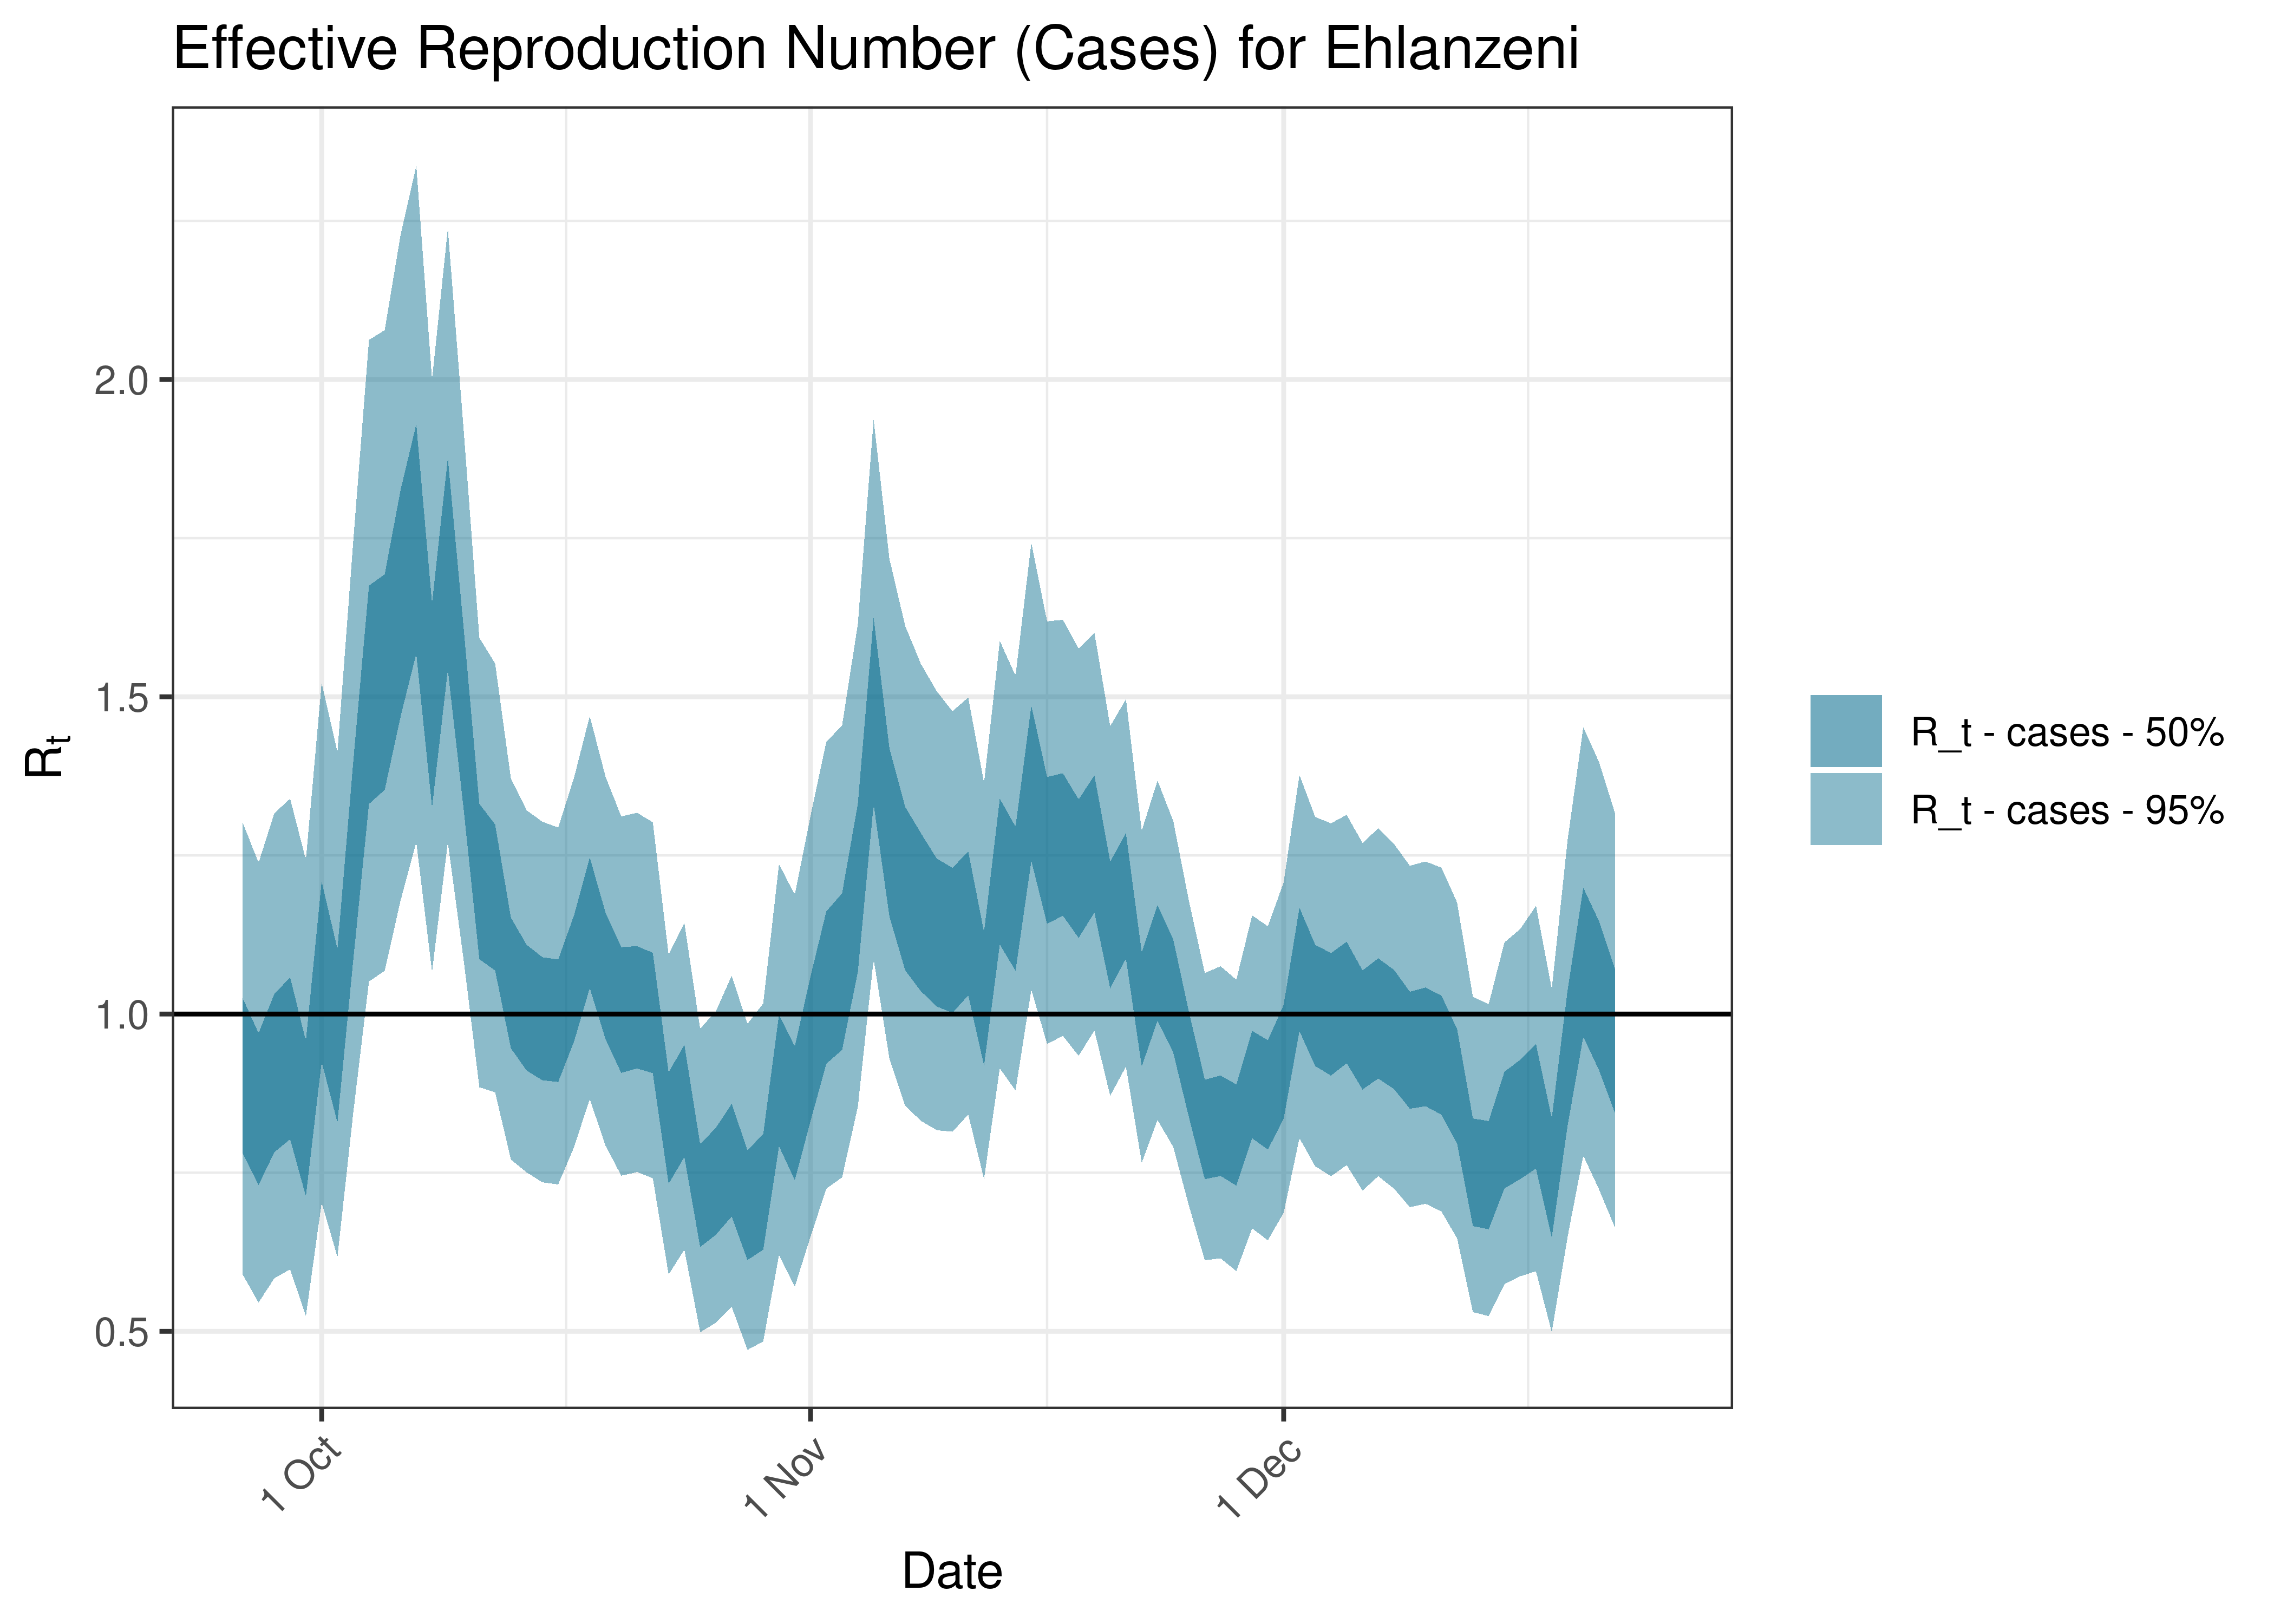 Estimated Effective Reproduction Number Based on Cases for Ehlanzeni over last 90 days